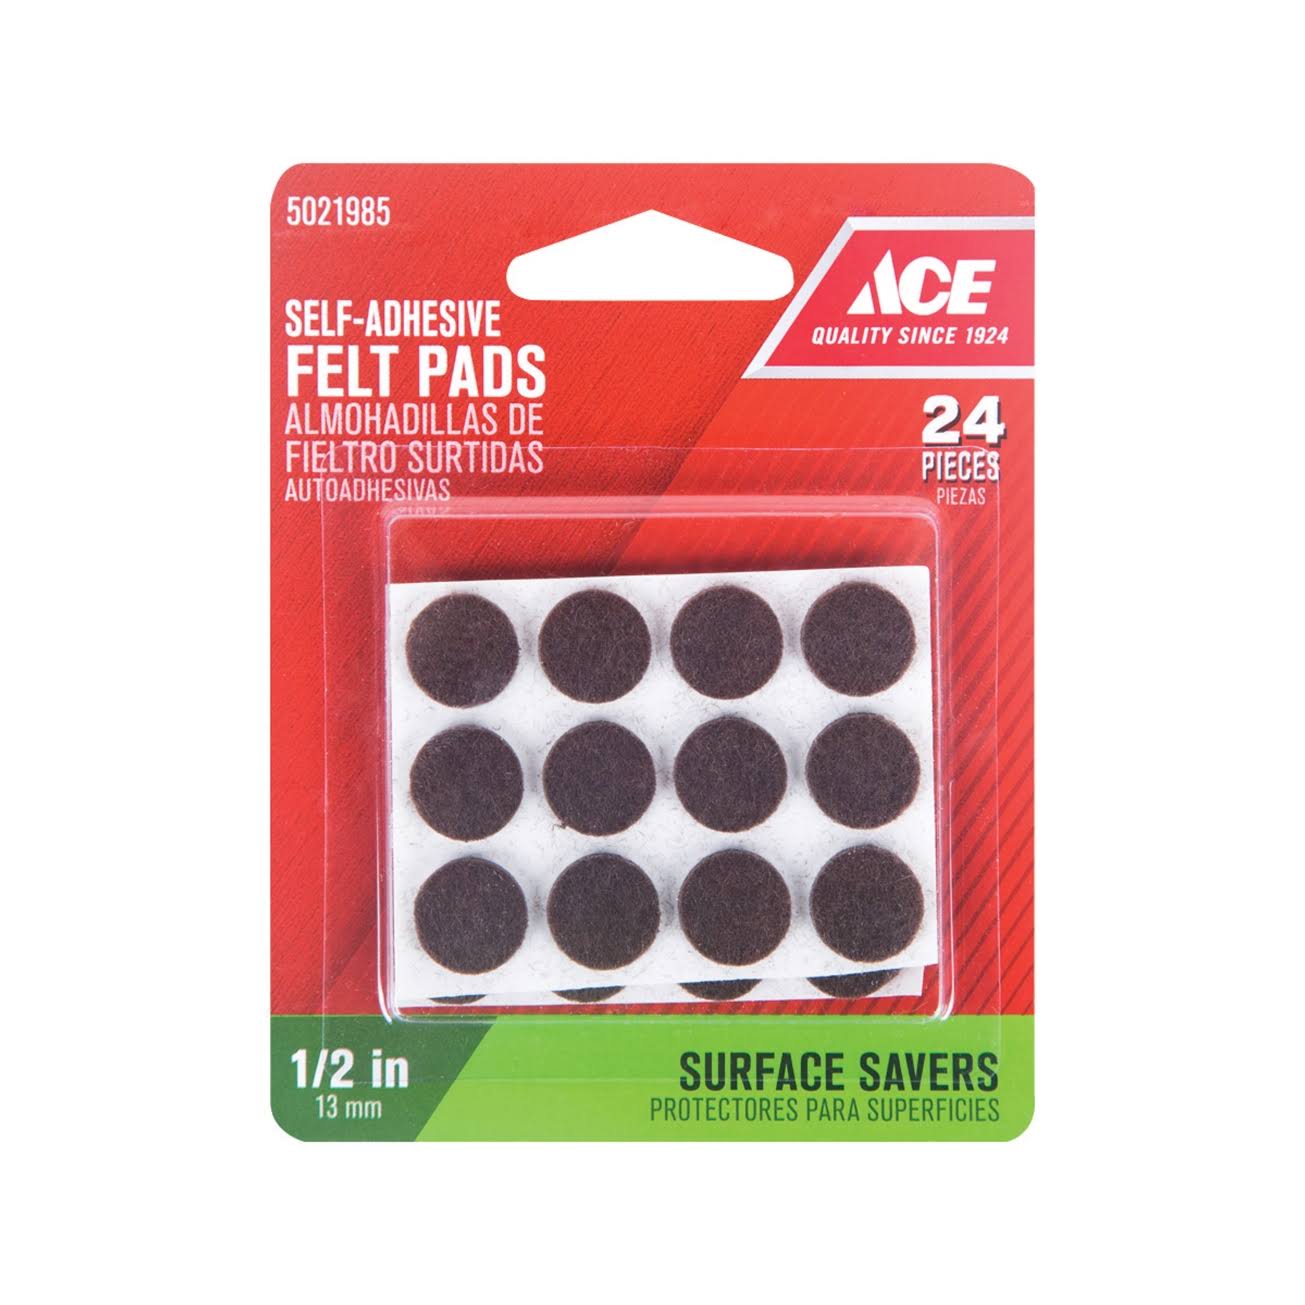 Ace Surface Savers Round Self-Adhesive Felt Pads, 0.5" - 24 count